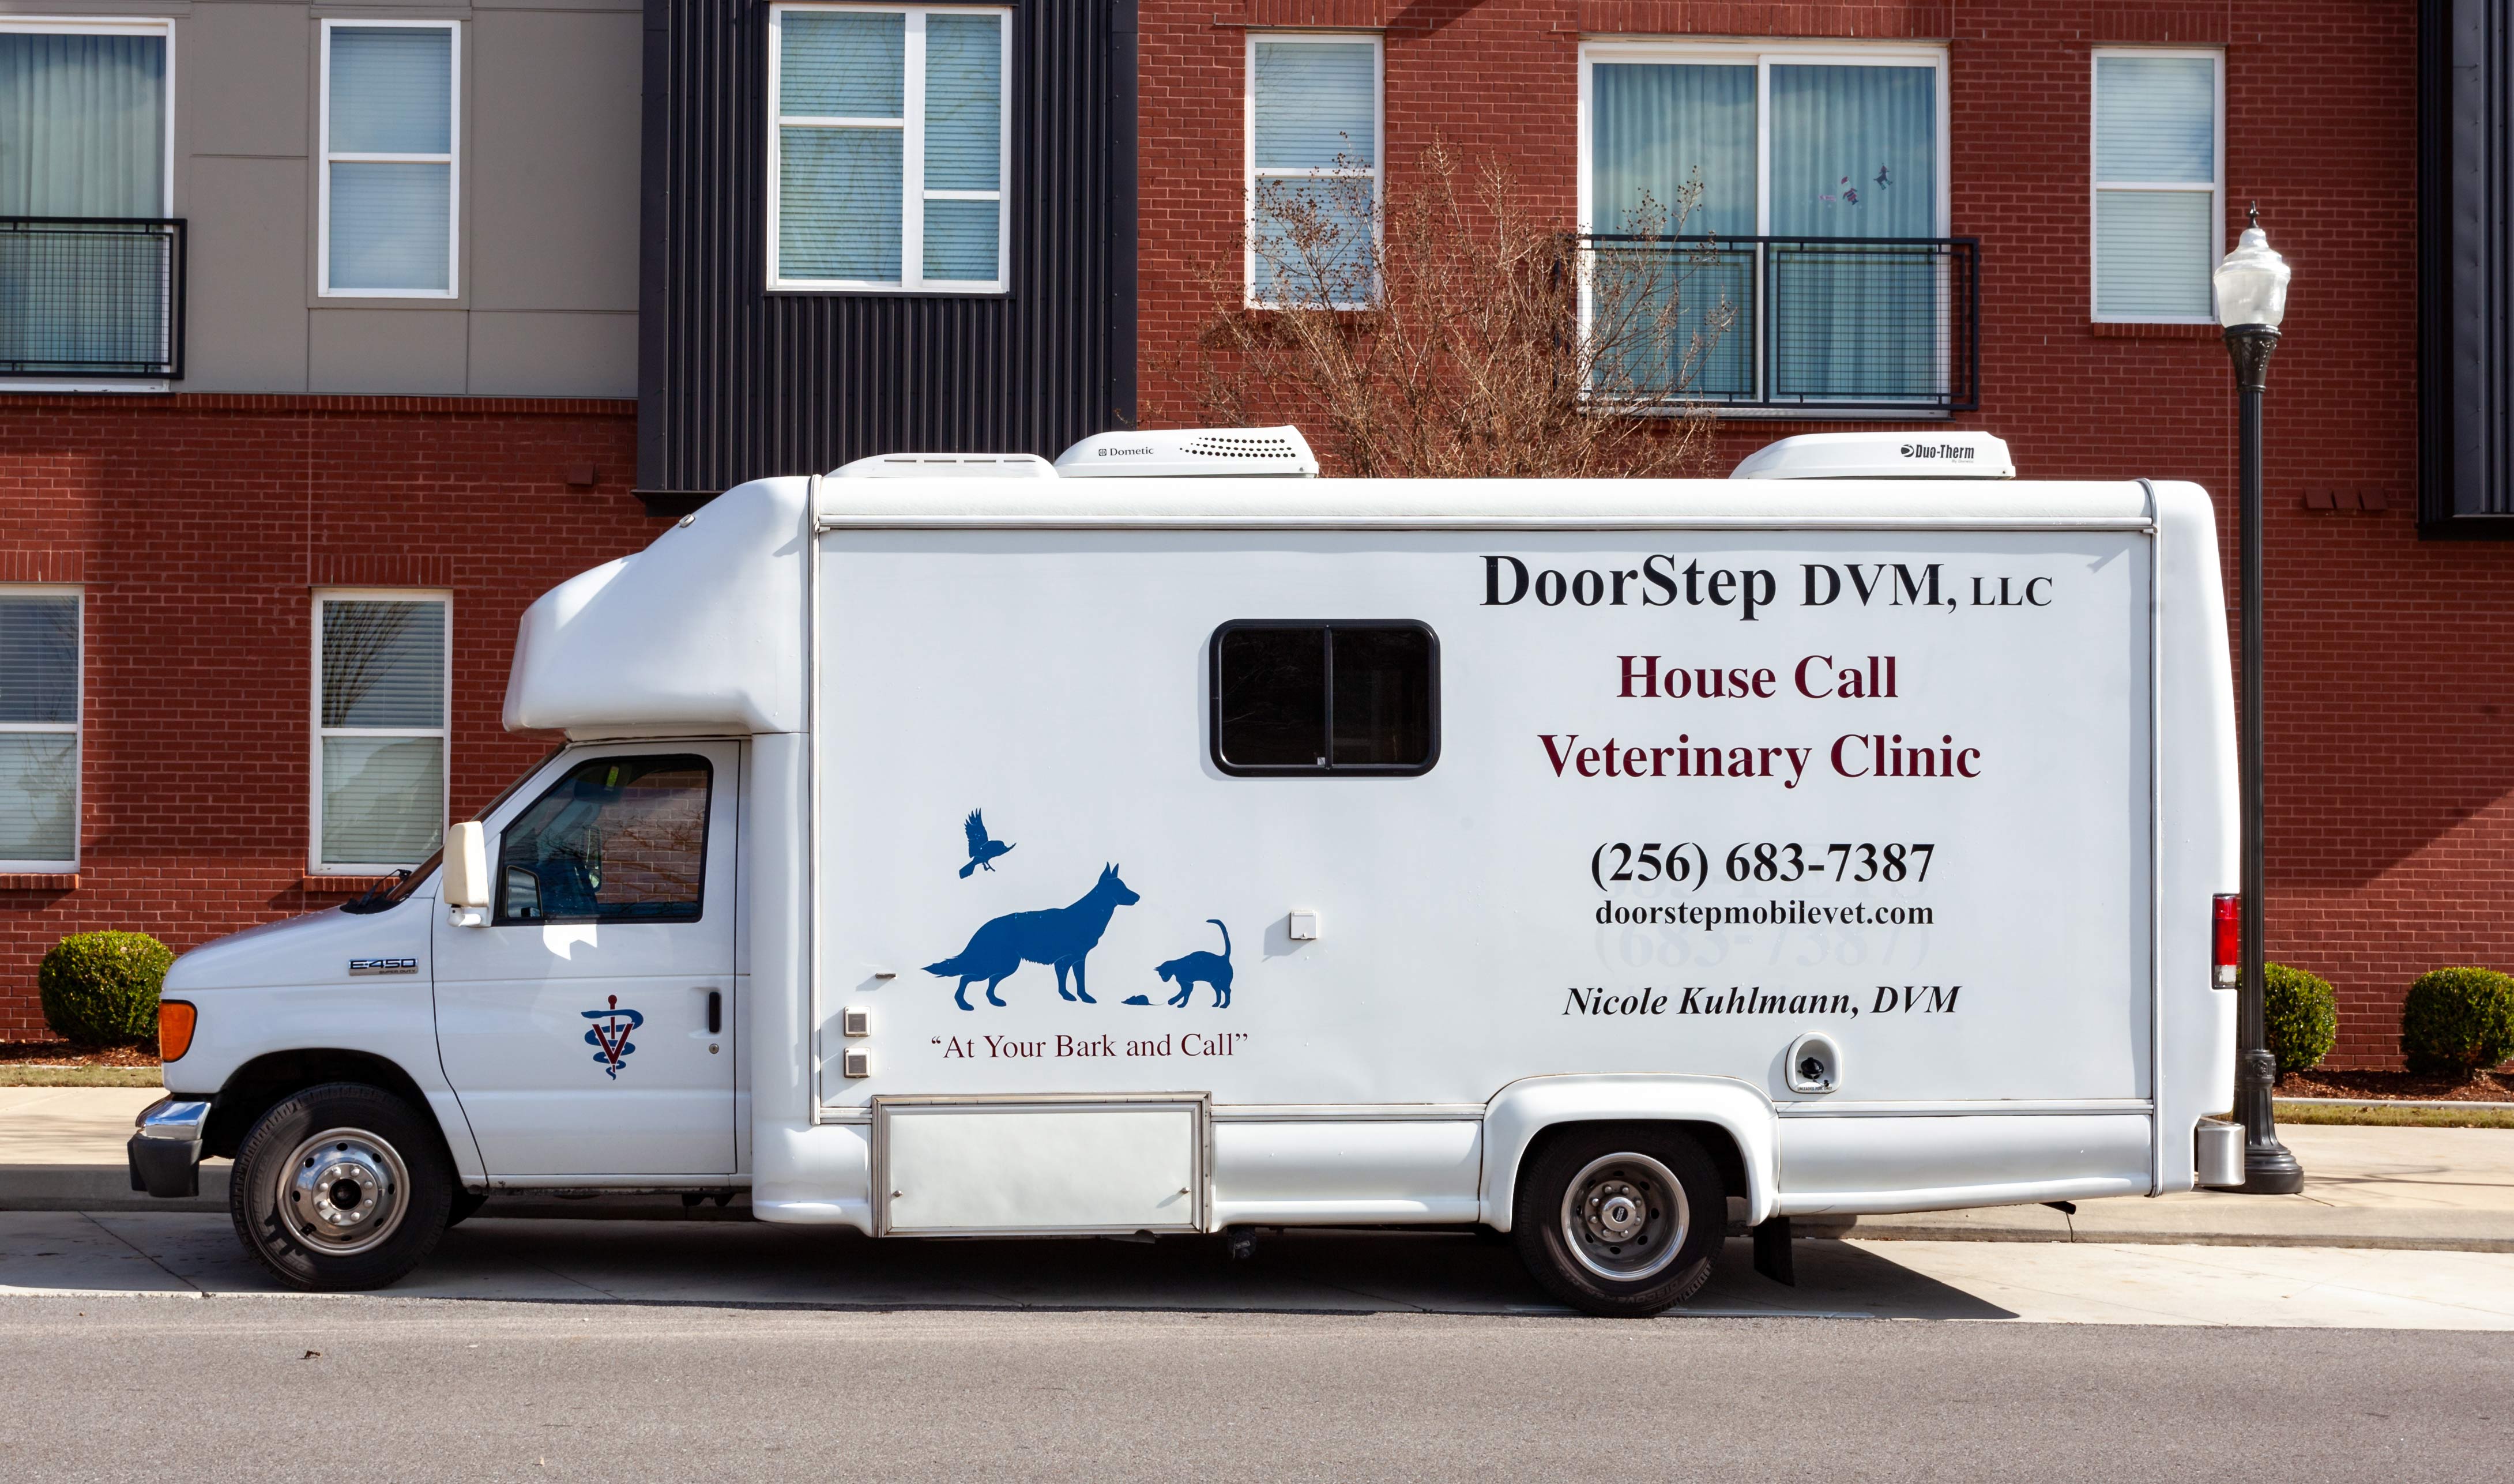 Take a Tour of our Mobile Veterinary Clinic